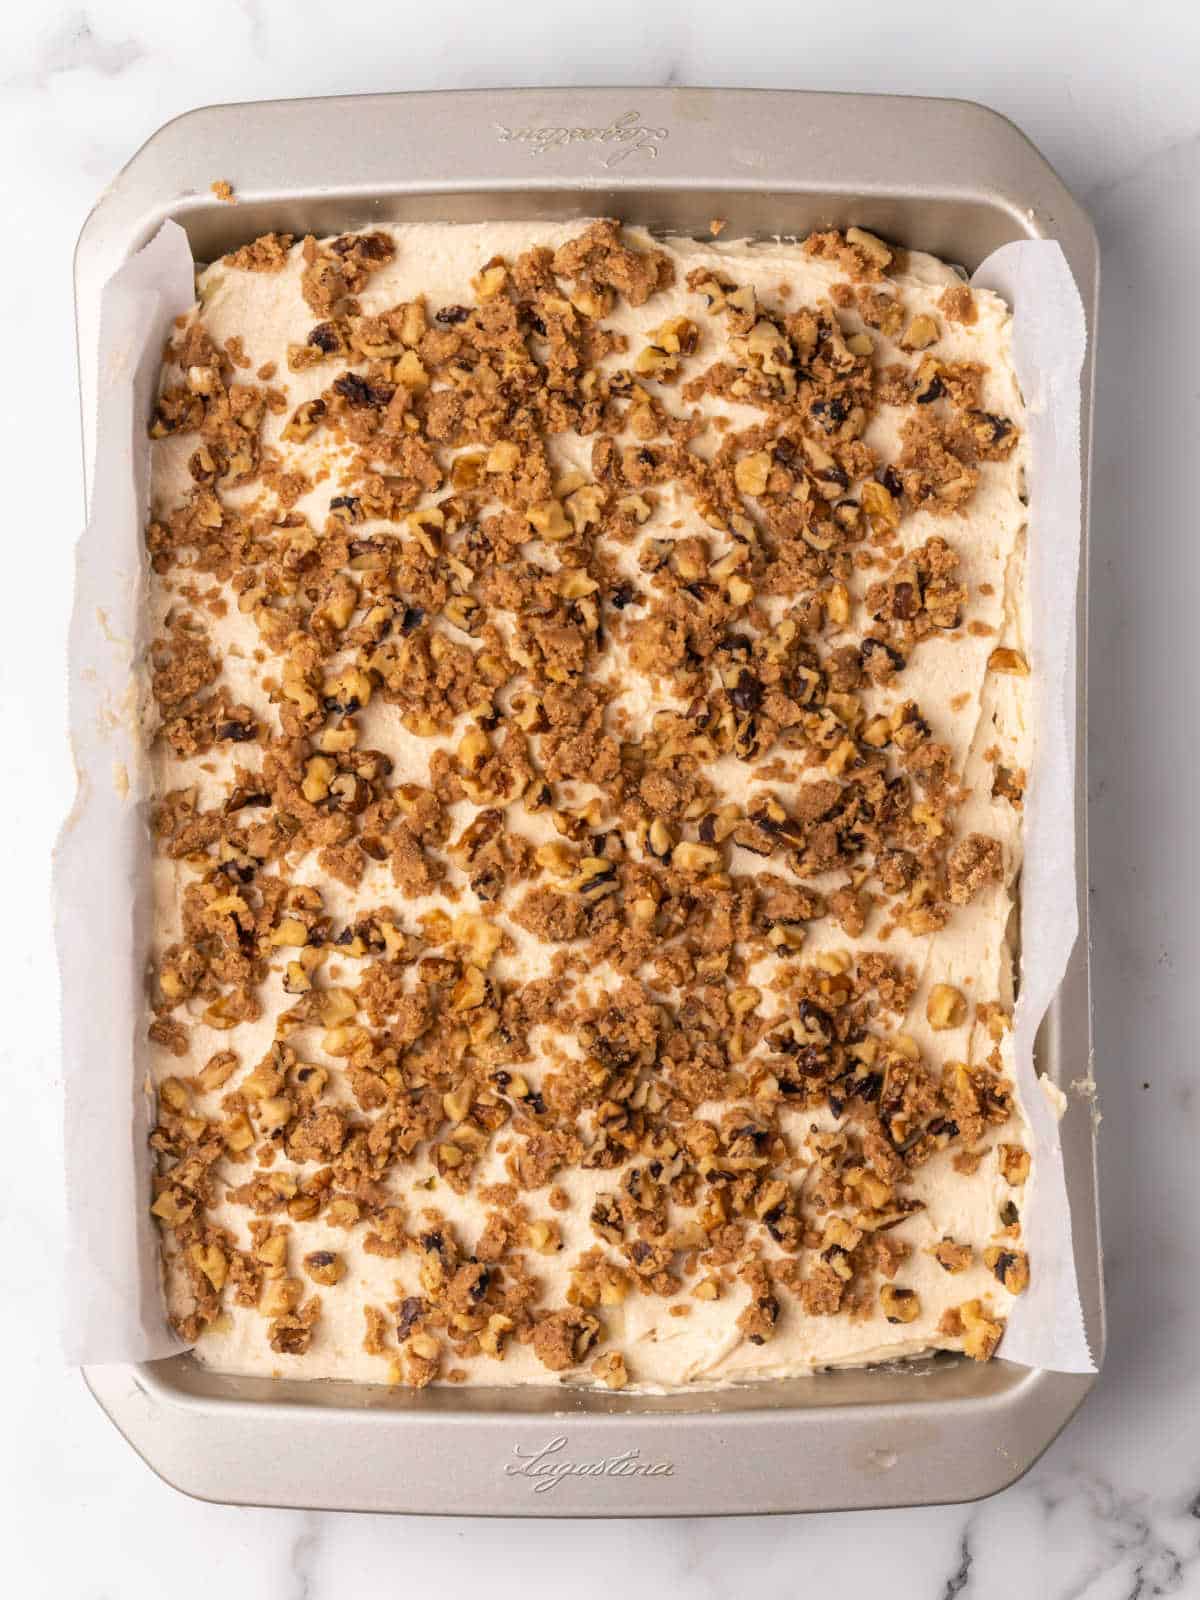 Brown sugar streusel topping on cake batter in a metal rectangular pan on a white marble surface.